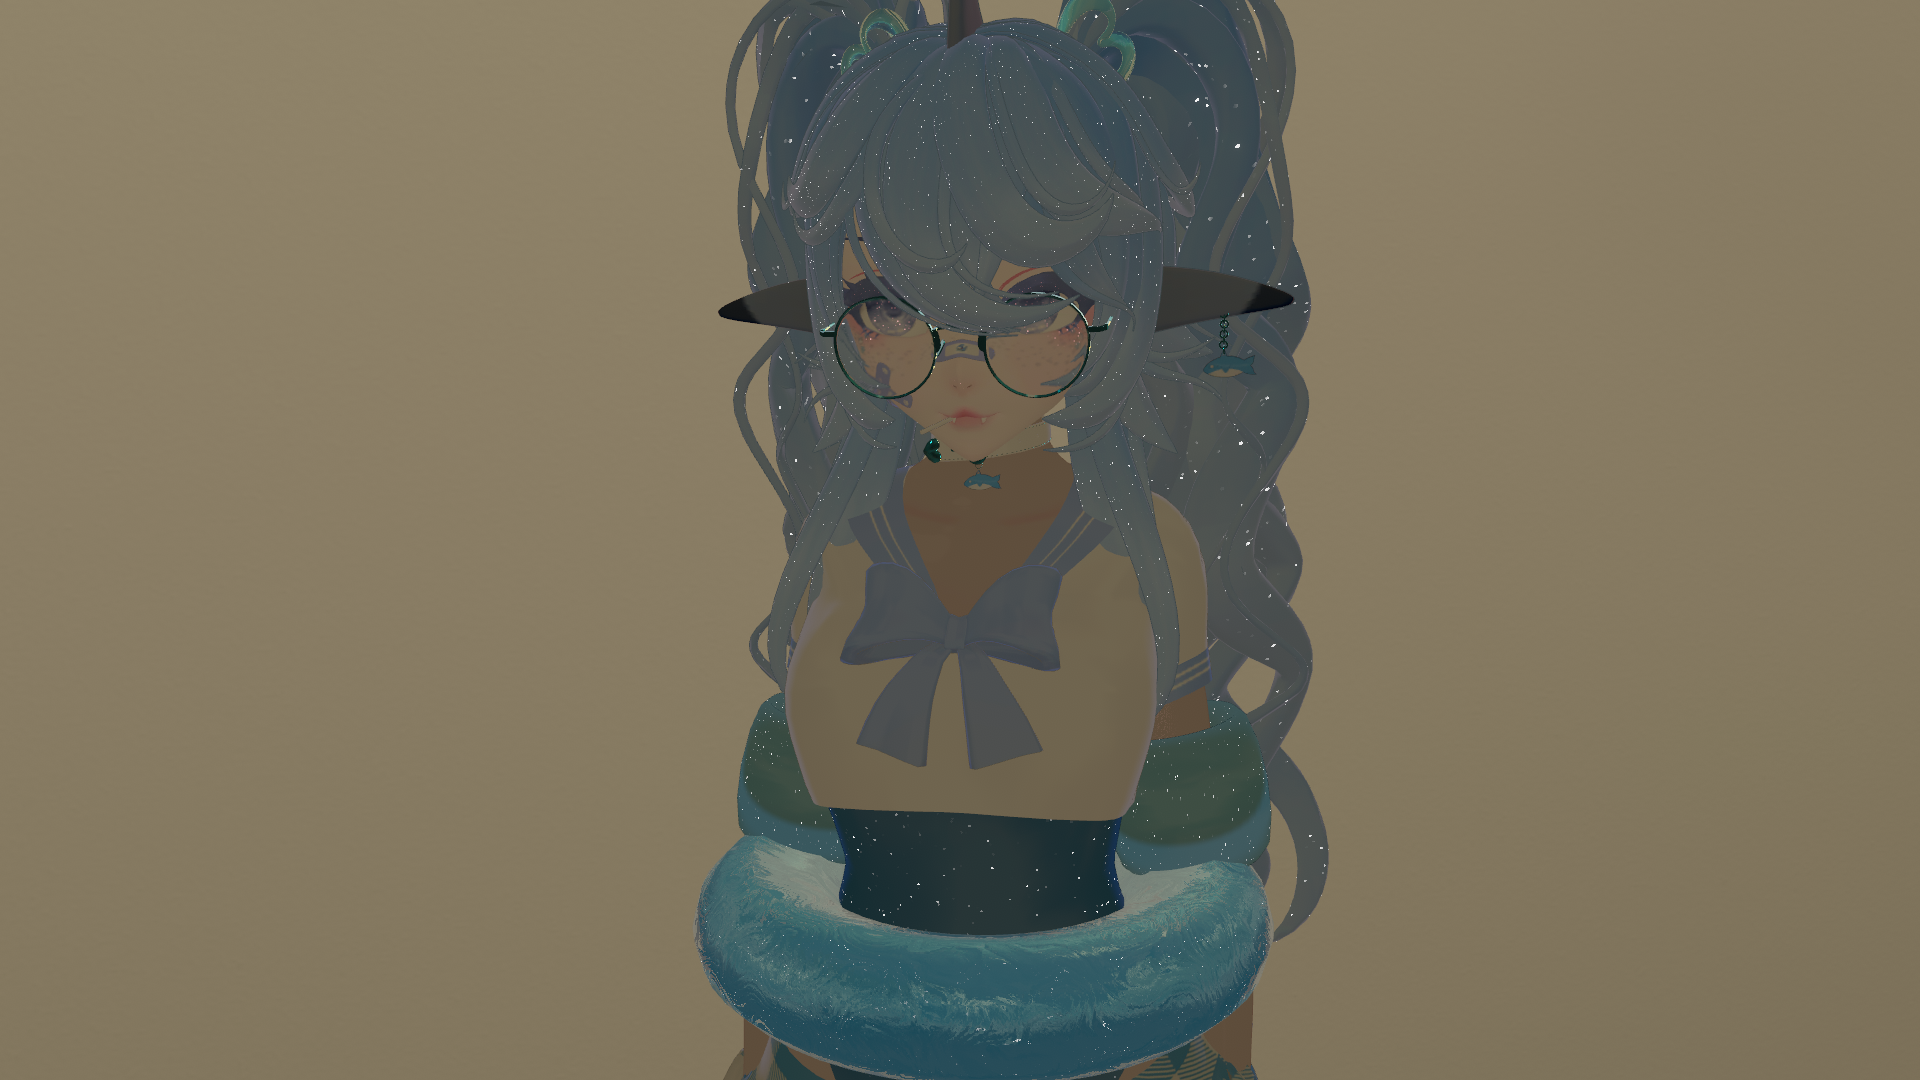 VRChat_2023-03-26_22-26-22.073_1920x1080.png